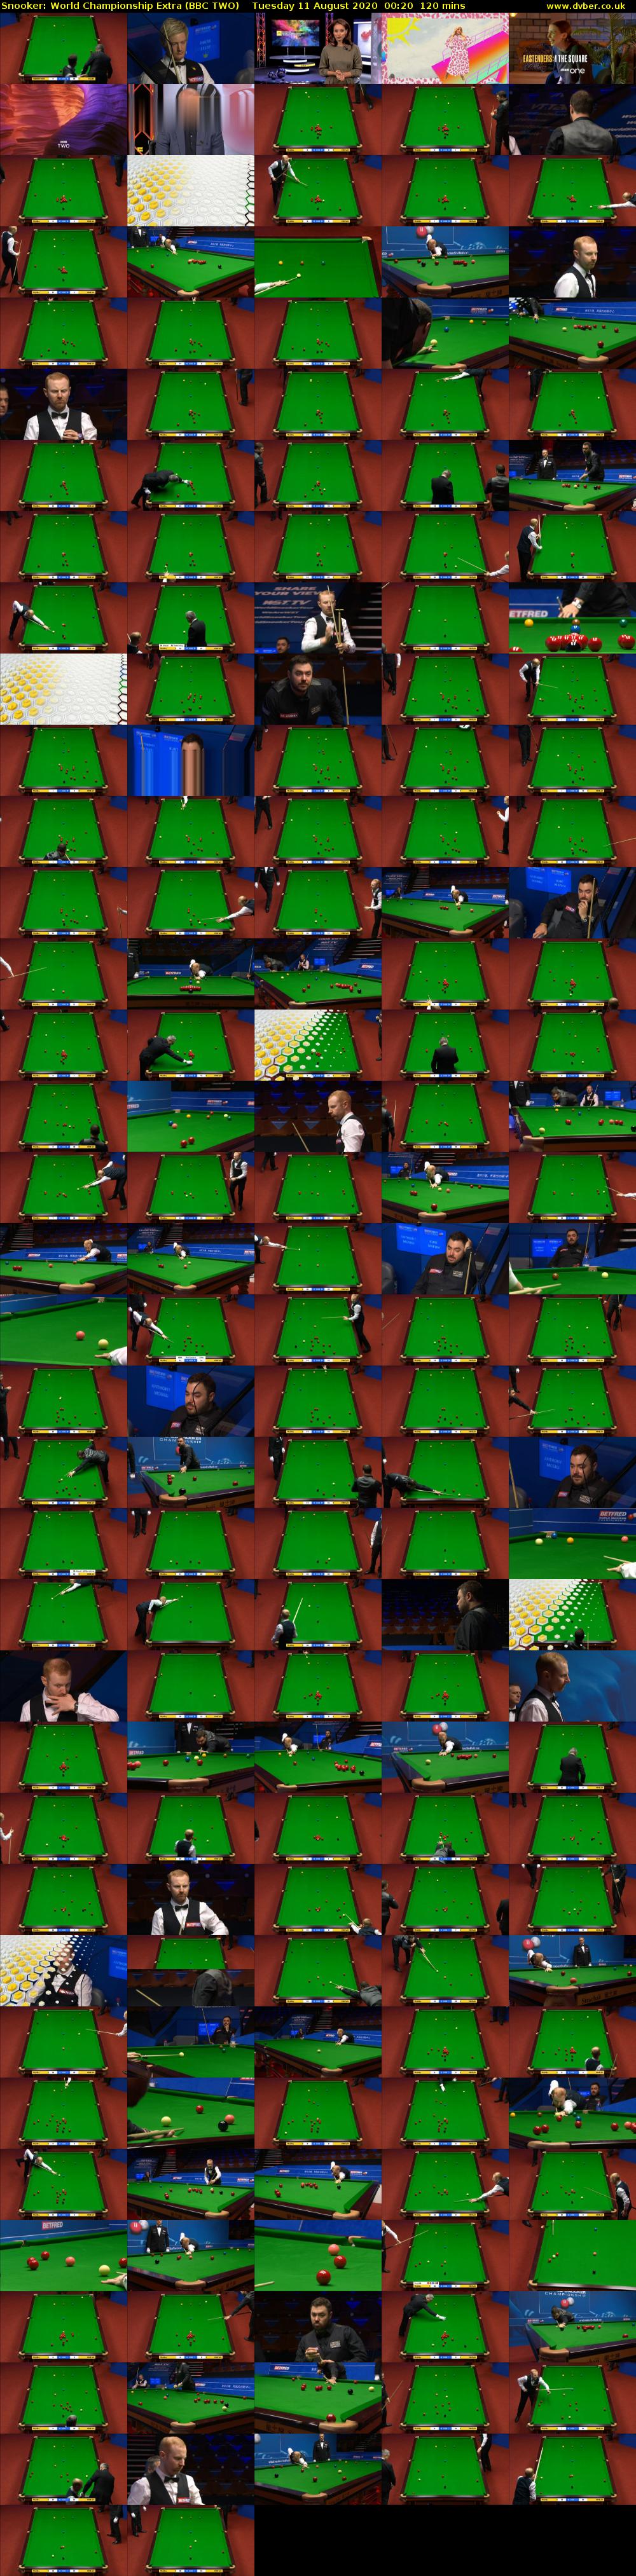 Snooker: World Championship Extra (BBC TWO) Tuesday 11 August 2020 00:20 - 02:20